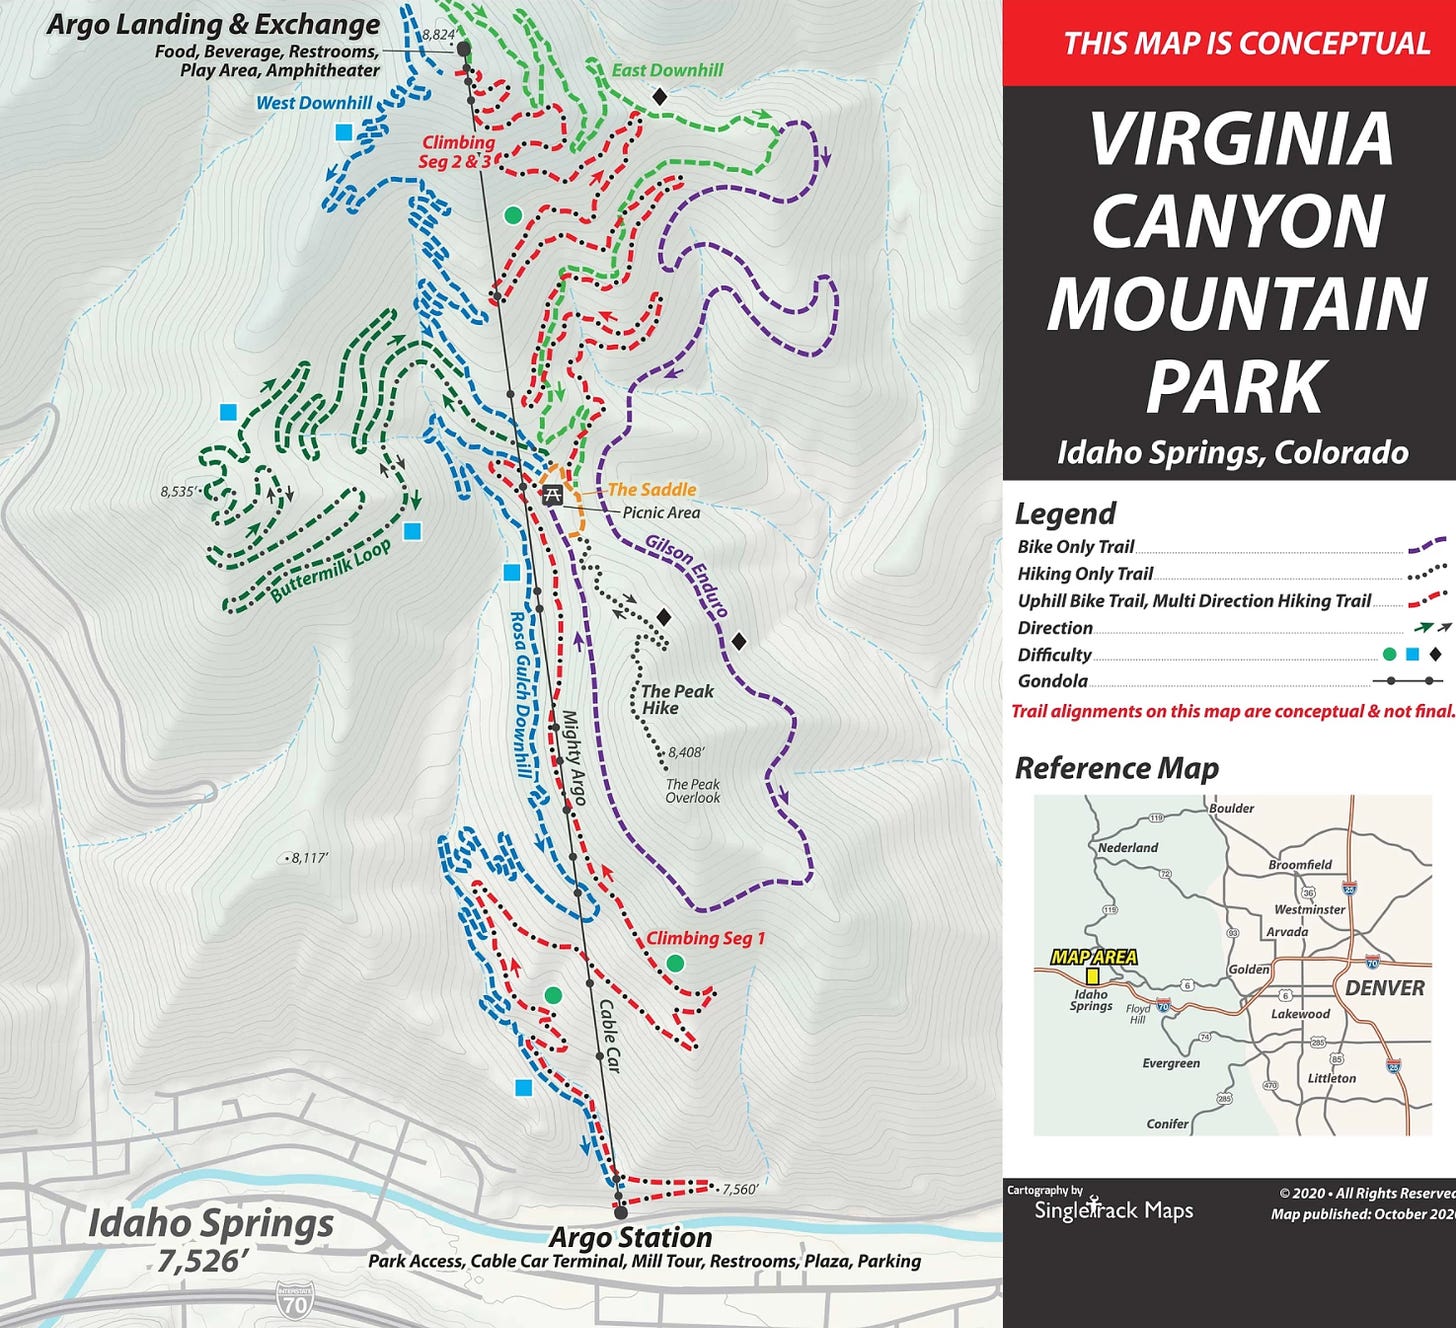 a map of the proposed terrain of the Virginia Canyon Mountain Park in Idaho Springs